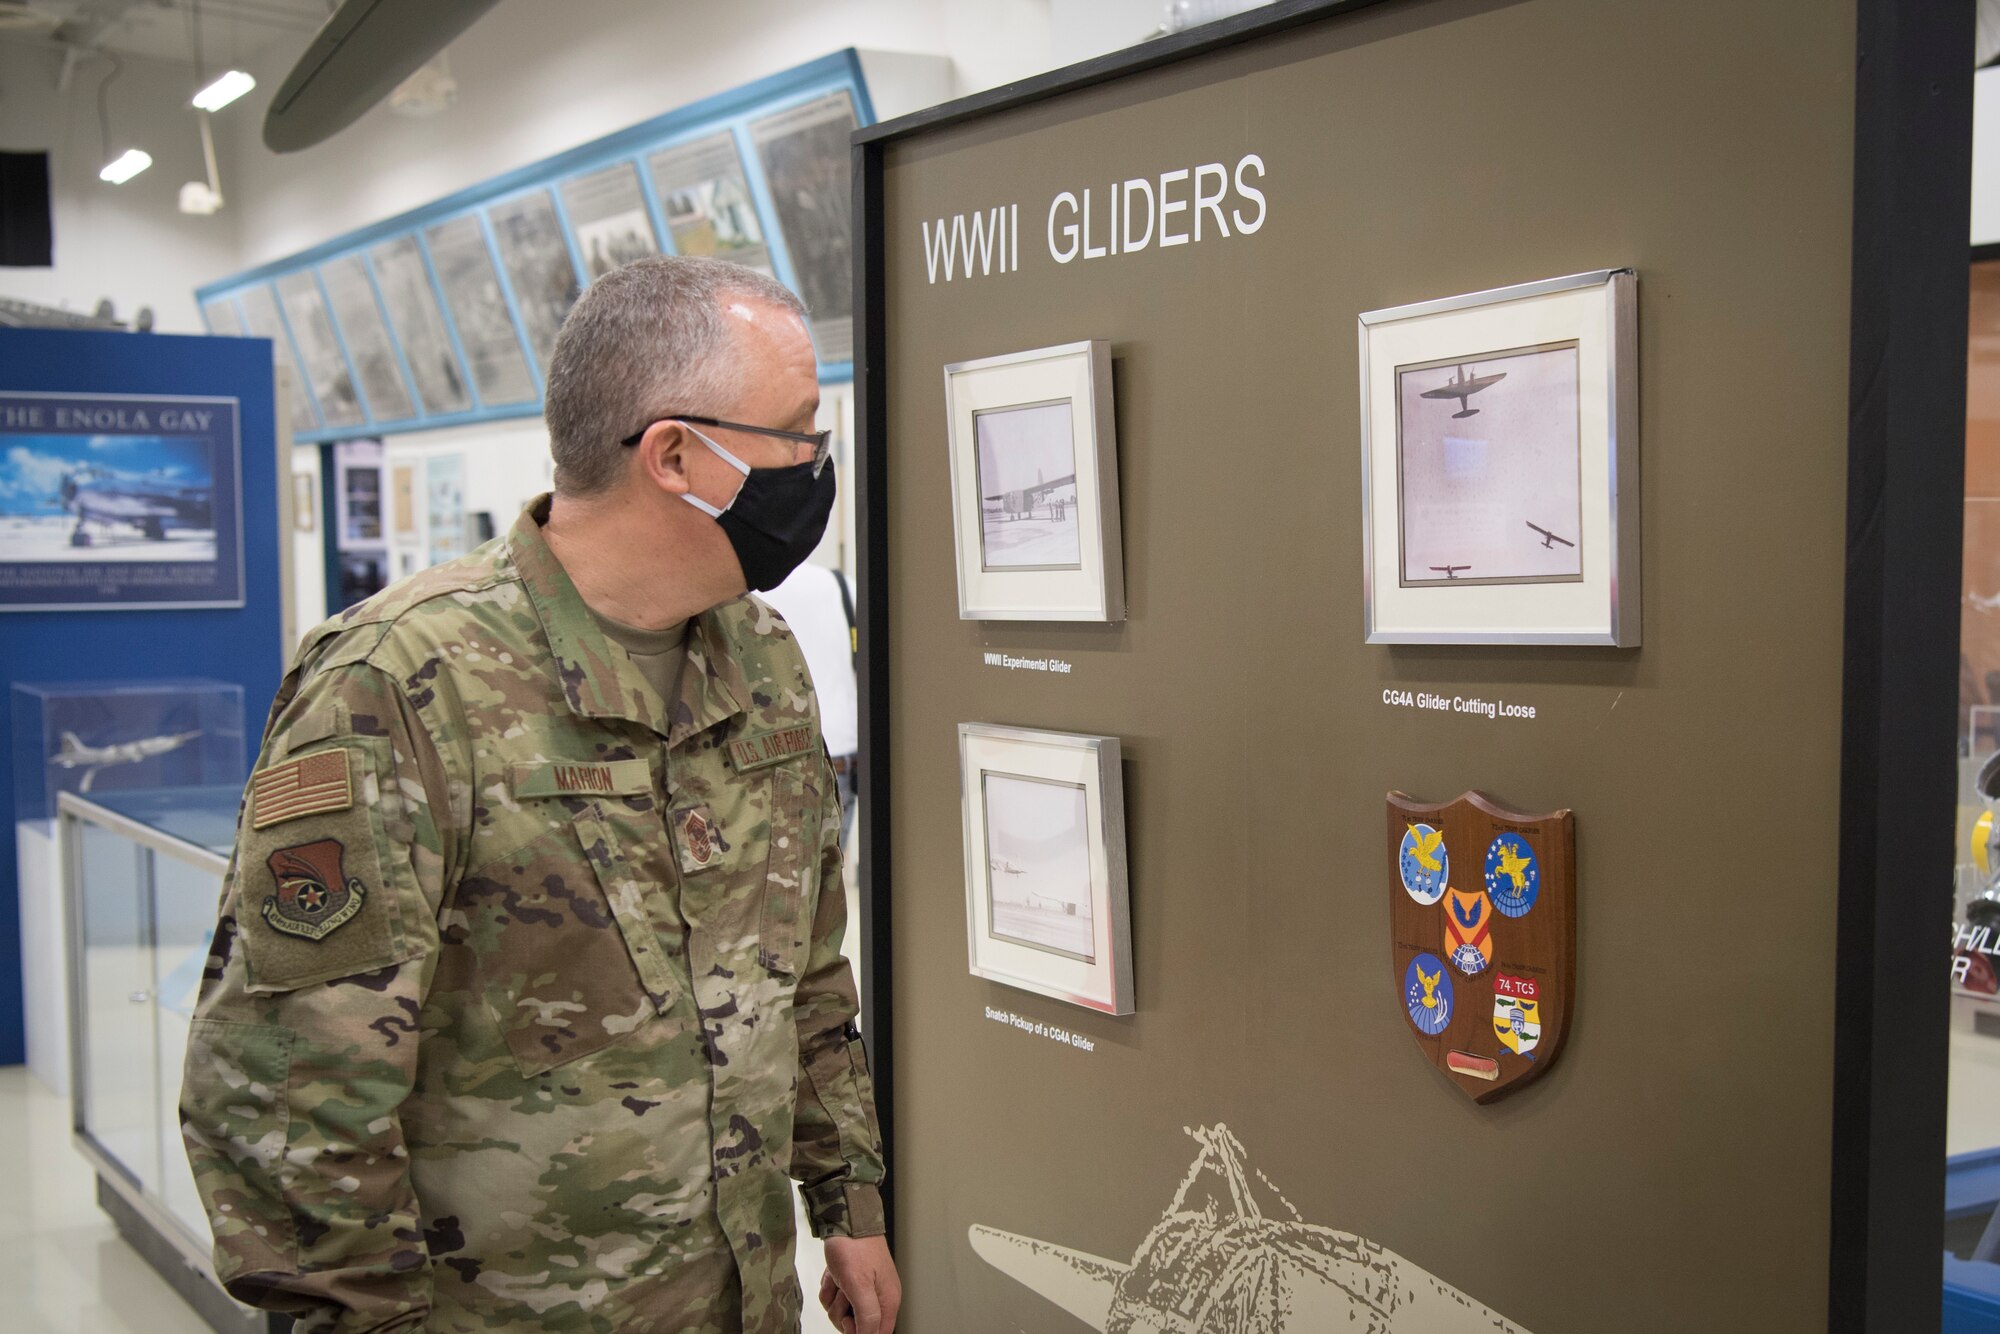 Chief Master Sgt. Wesley Marion, 434th Air Refueling Wing command chief, views a display of the World War II gliders used by the 434th Troop Carrier Group, the legacy unit to the 434th ARW at the Atterbury-Bakalar Air Museum in Columbus, Indiana, Sept. 17, 2020.  The primary mission of troop carrier units was to provide transportation for parachute troops, airborne infantry, and glider units. (U.S. Air Force photo/Master Sgt. Ben Mota)